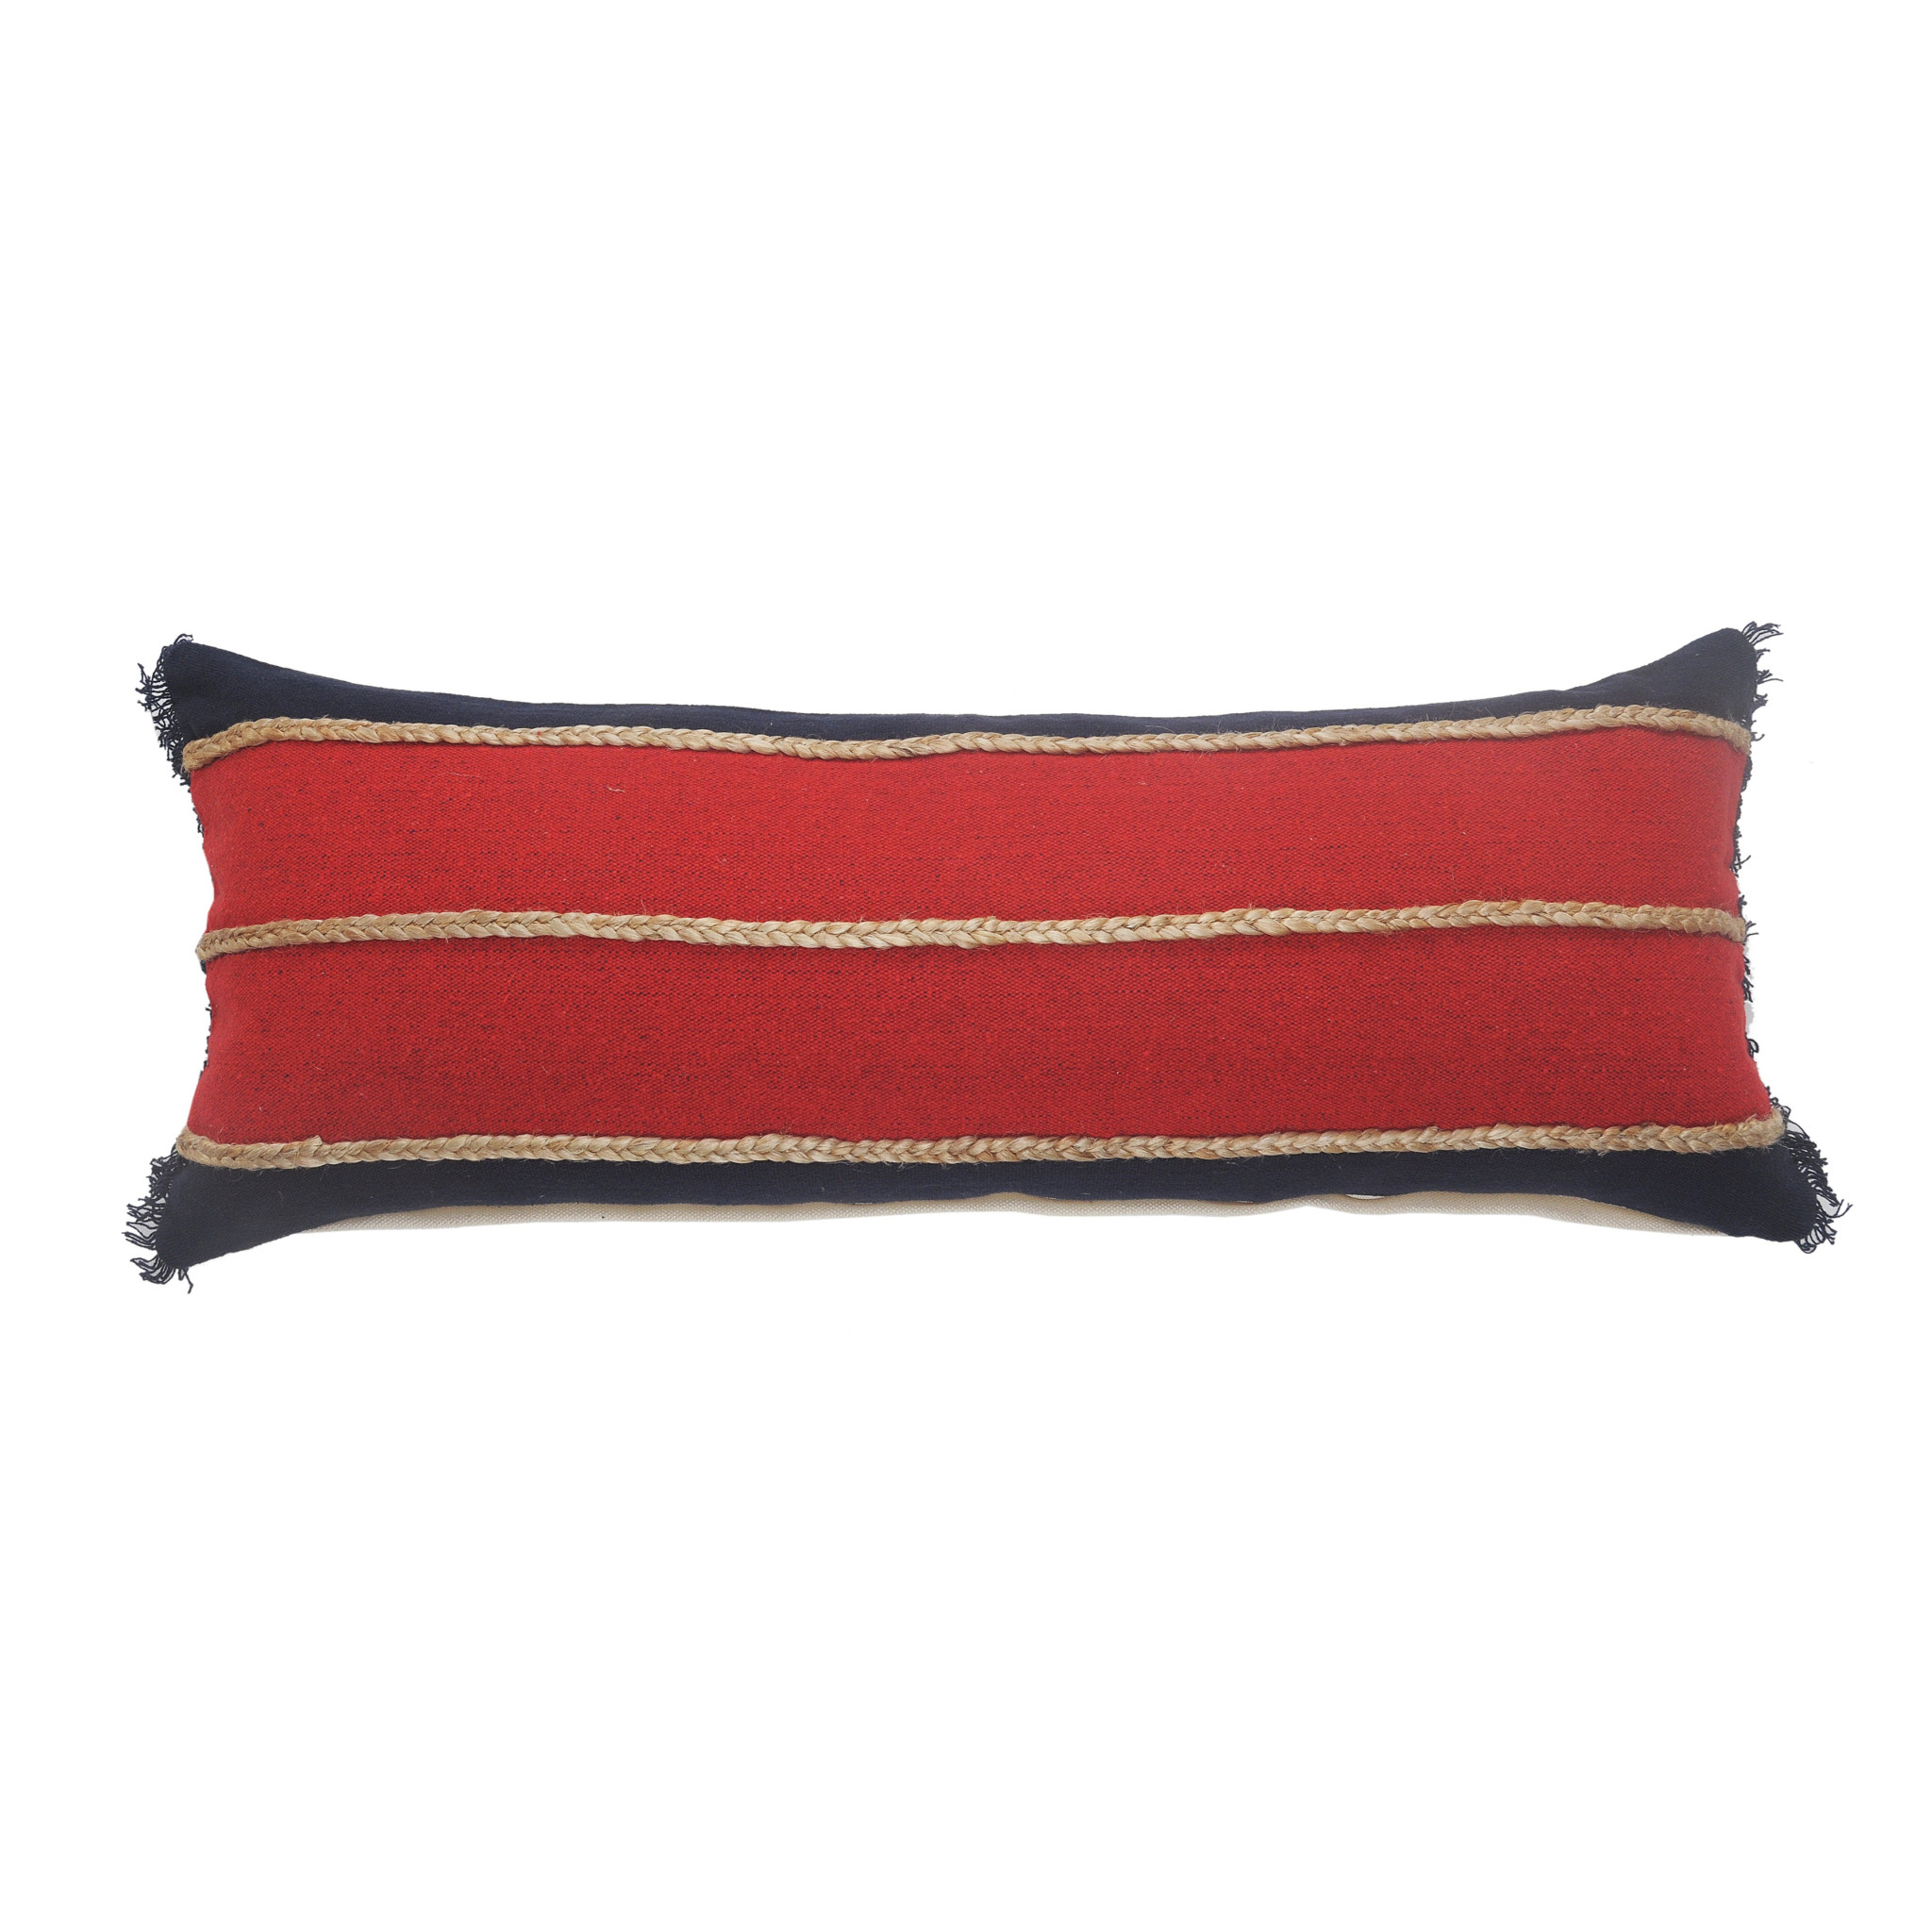 14" X 36" Red Navy And Tan 100% Cotton Striped Zippered Pillow-517268-1